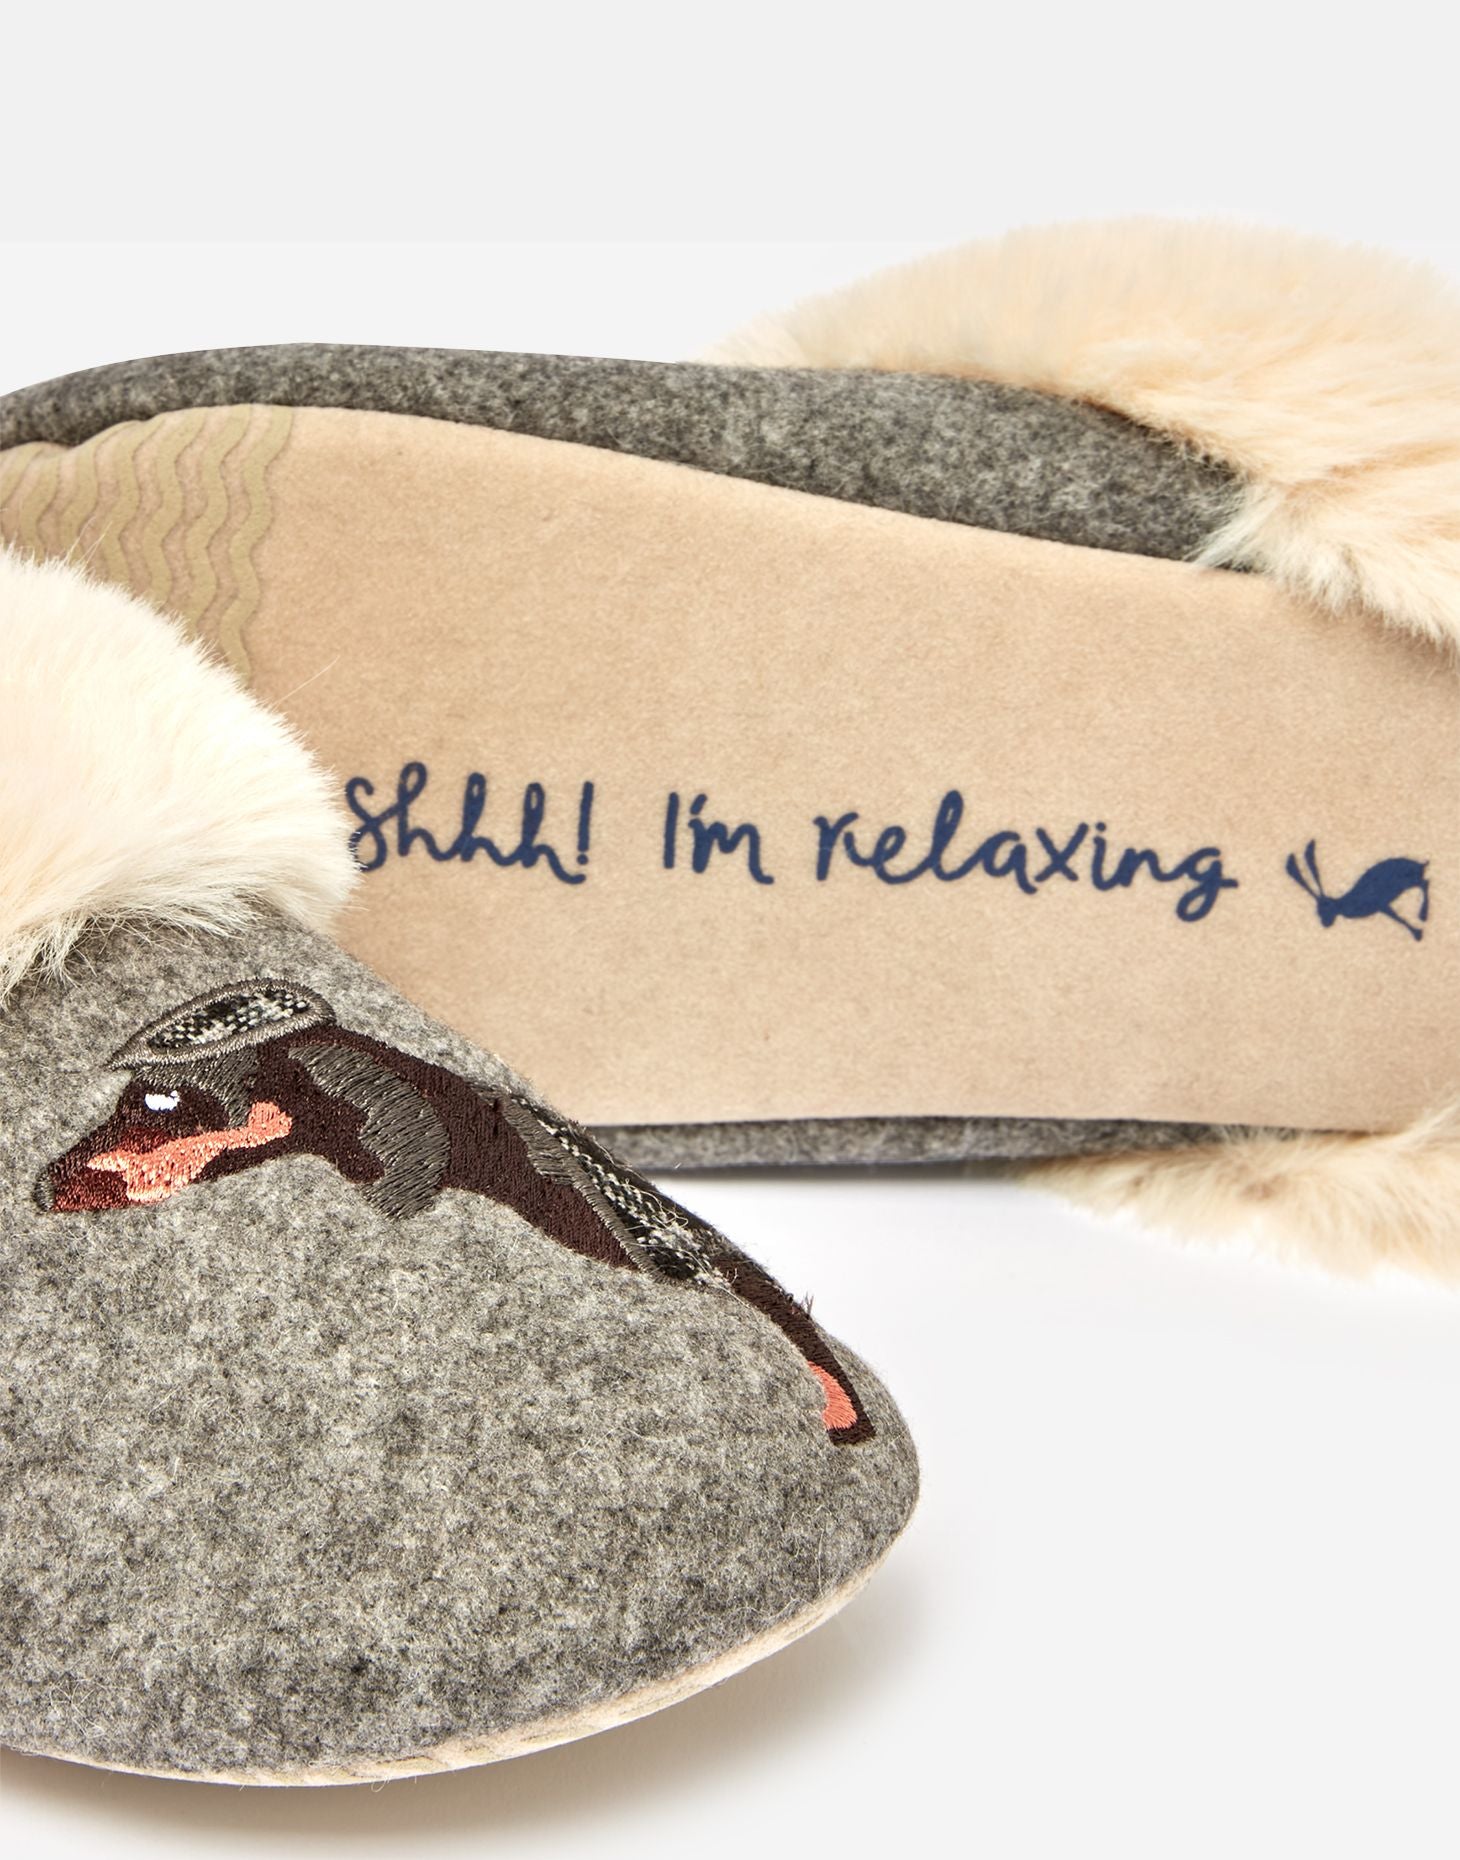 Slippet Luxe Slip On Character Slippers - Tweed Sausage Dog